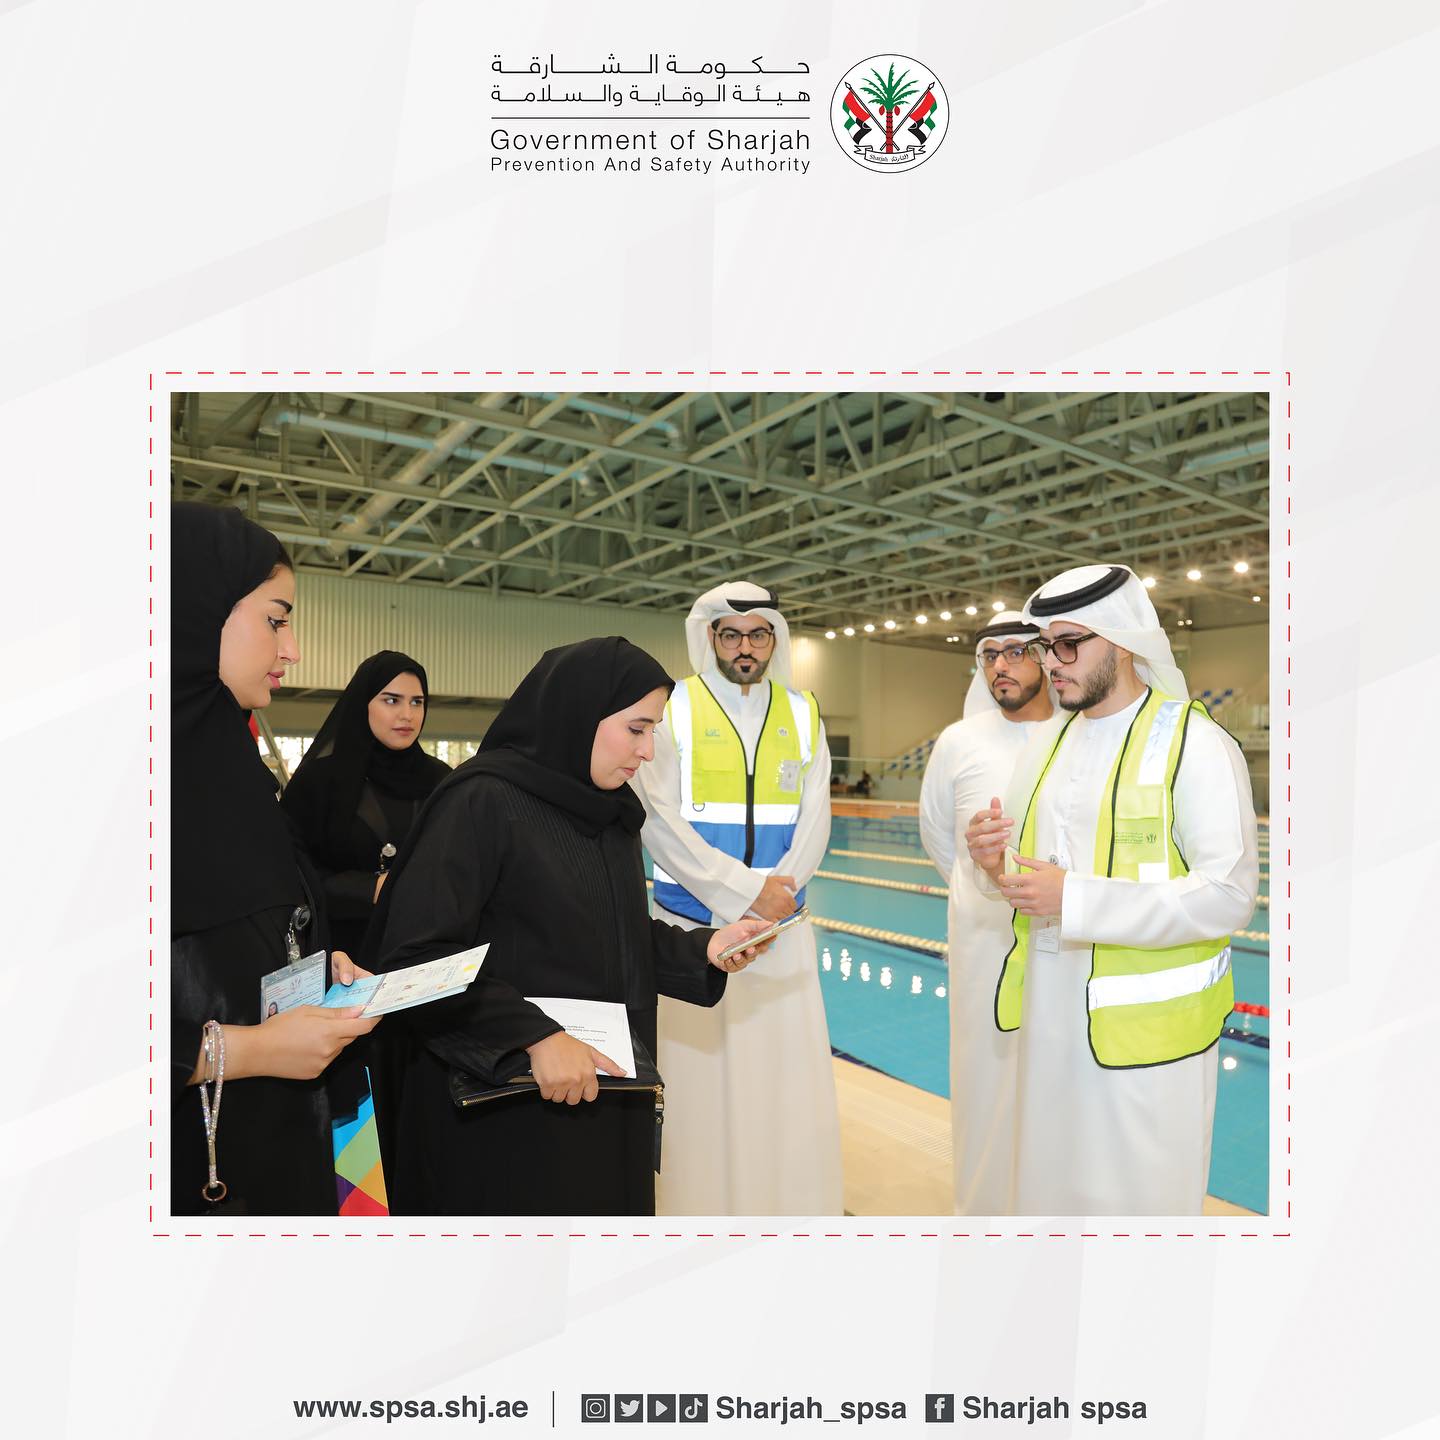 The Prevention and Safety Authority launched a safety campaign for swimming pools